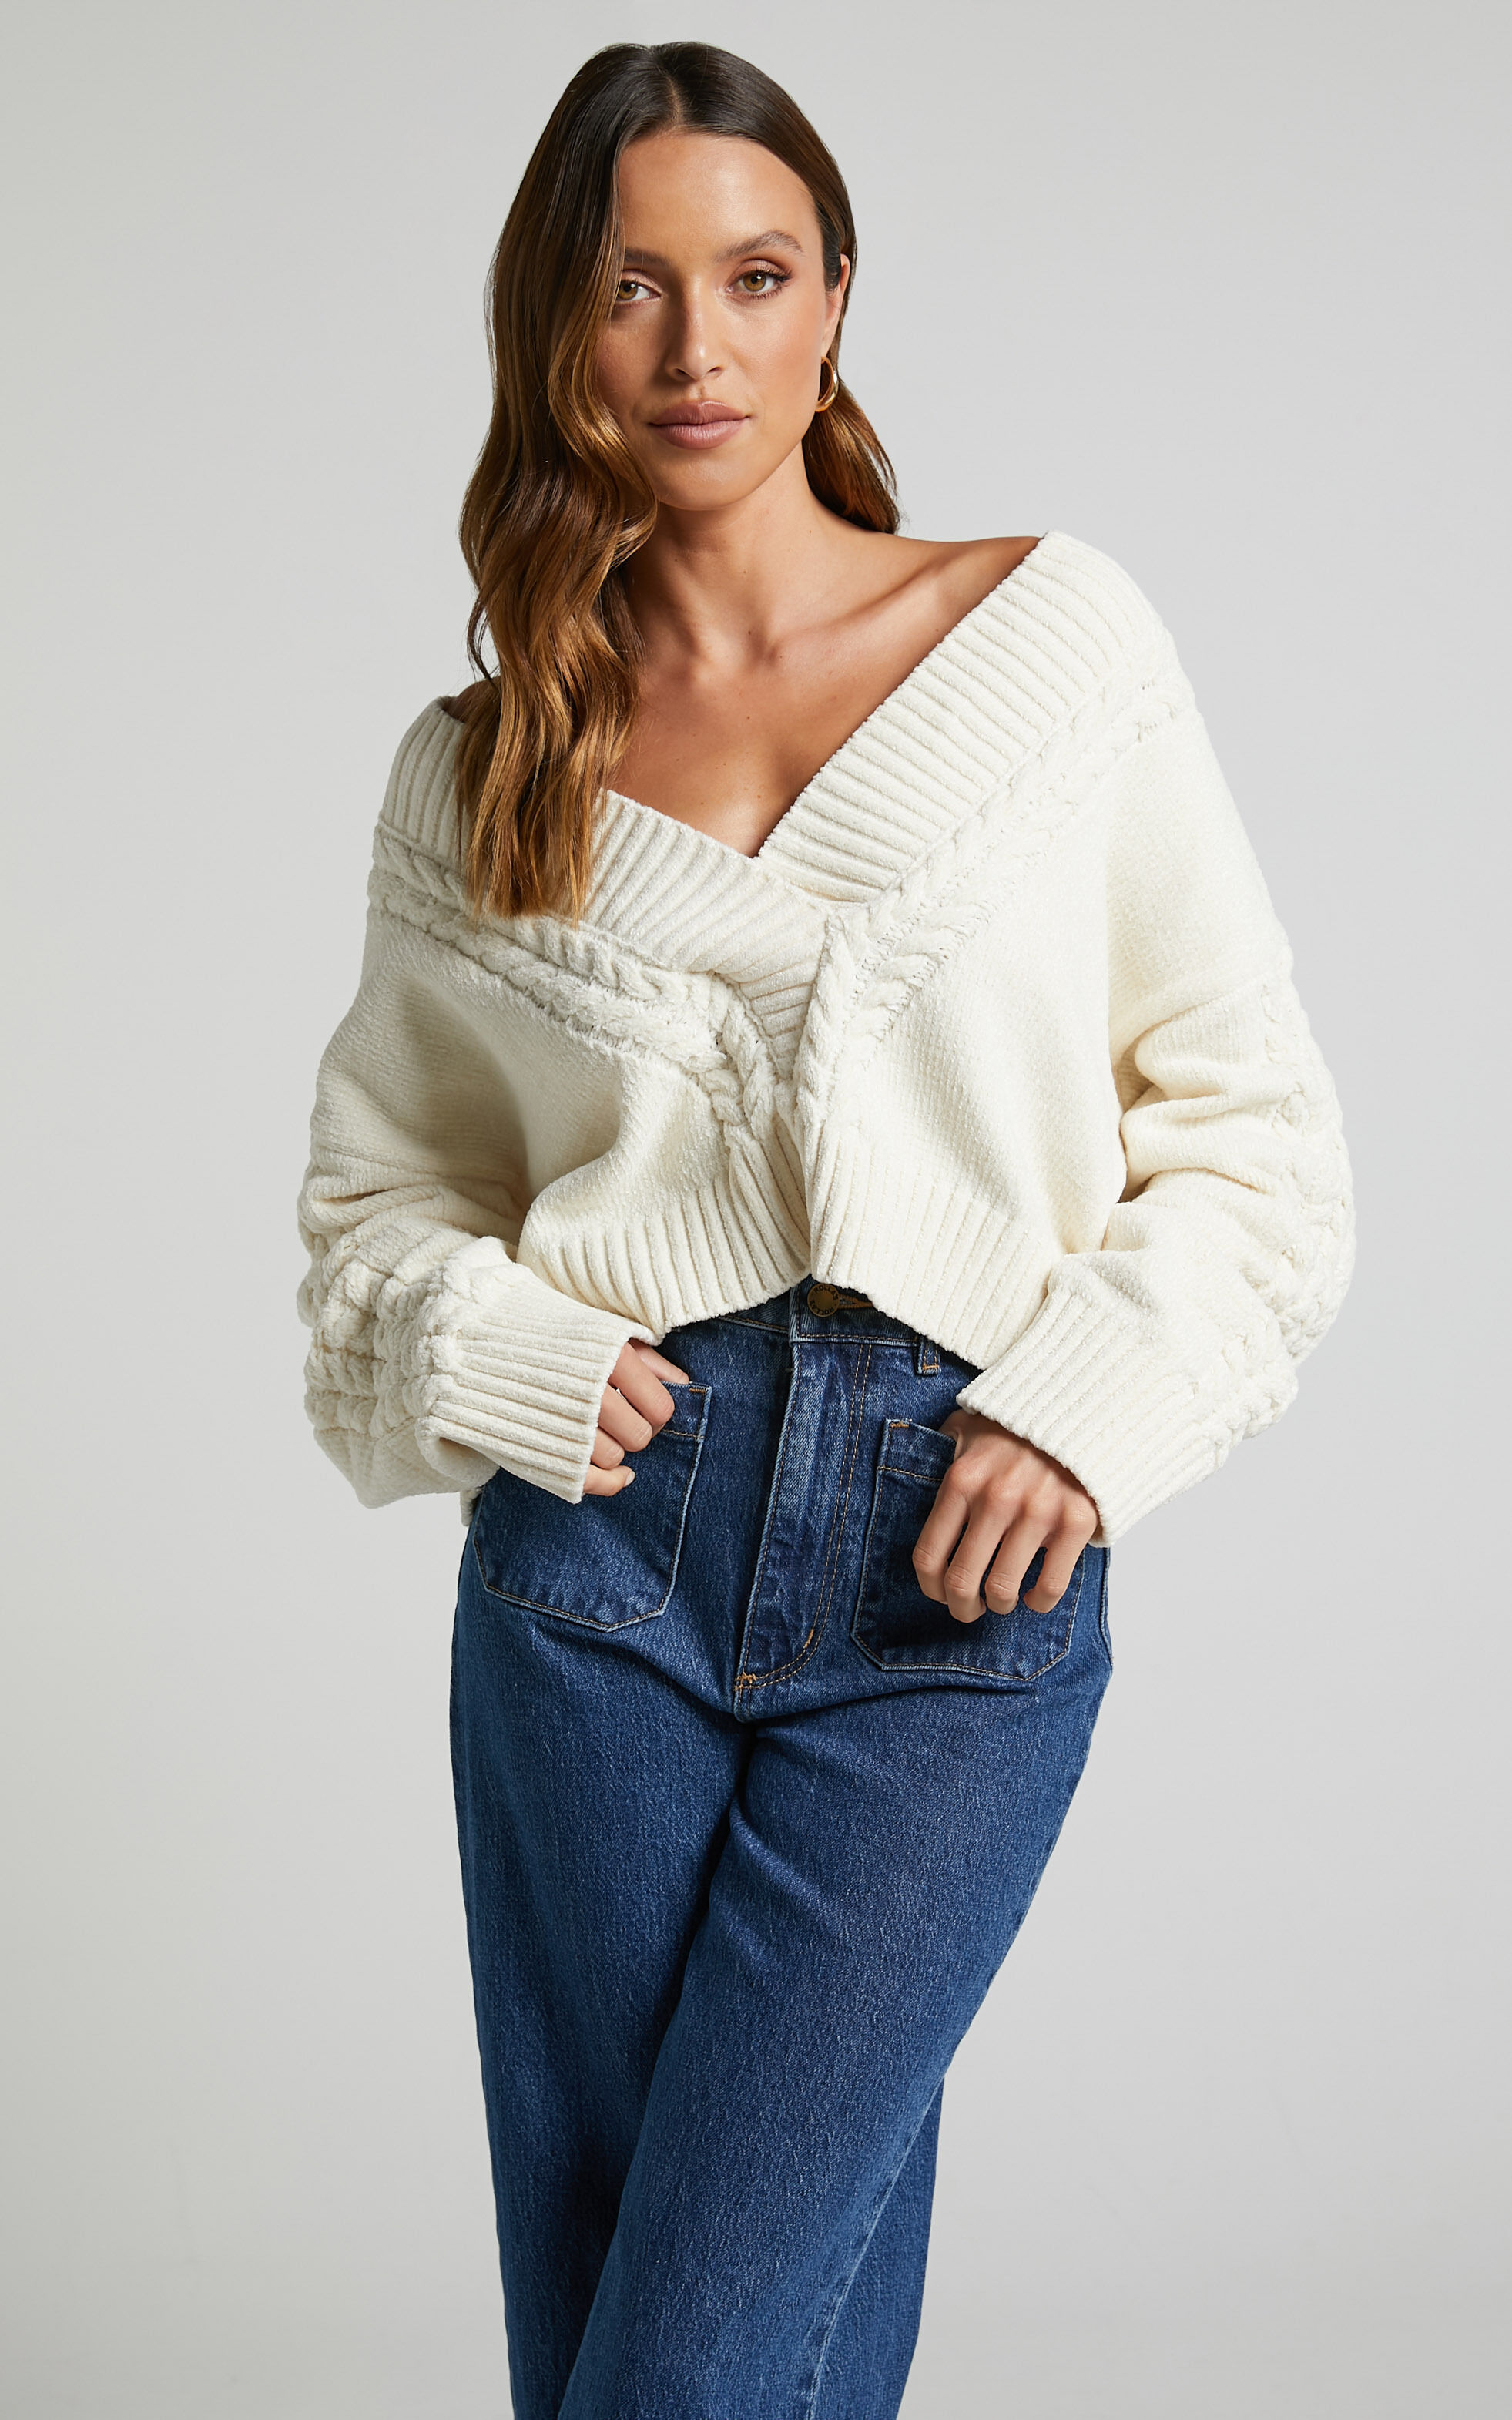 4th & Reckless - Mariella Jumper Boucle Cable Knit in Cream - 06, CRE1, super-hi-res image number null